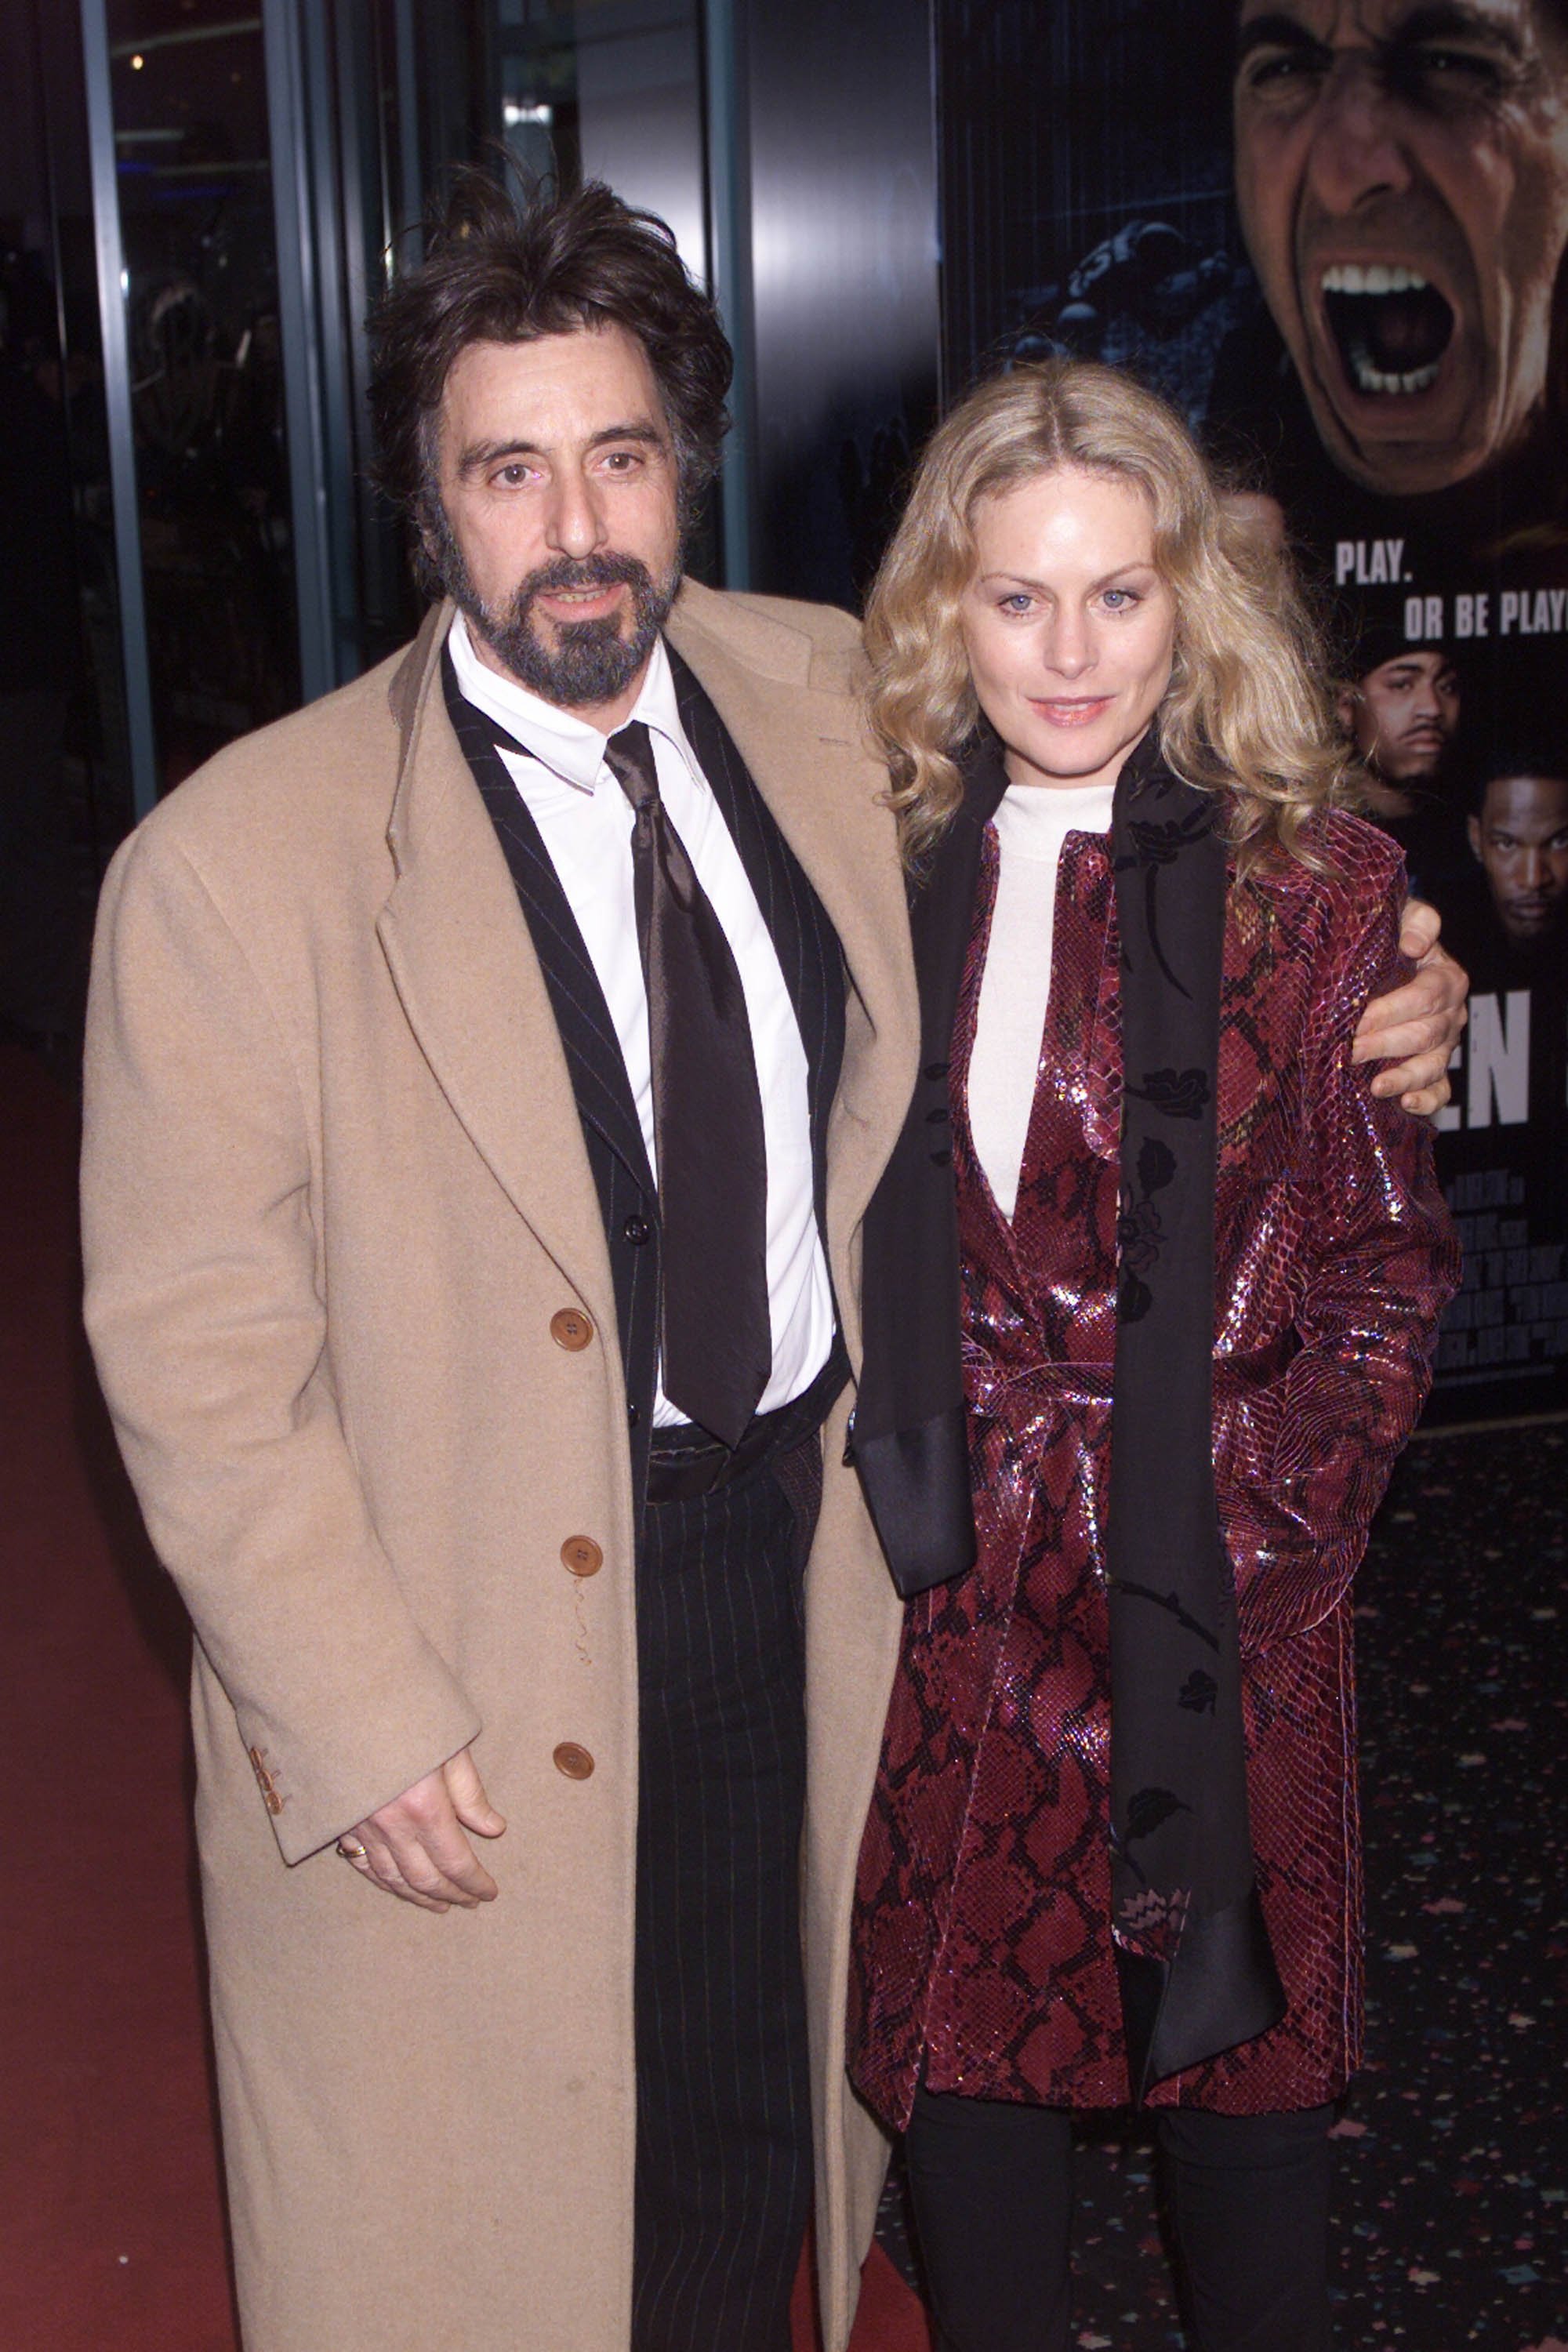 Al Pacino & Beverley D'Angelo at the UK premiere of the film "Any Given Sunday" on March 29, 2000 | Photo: Getty Images